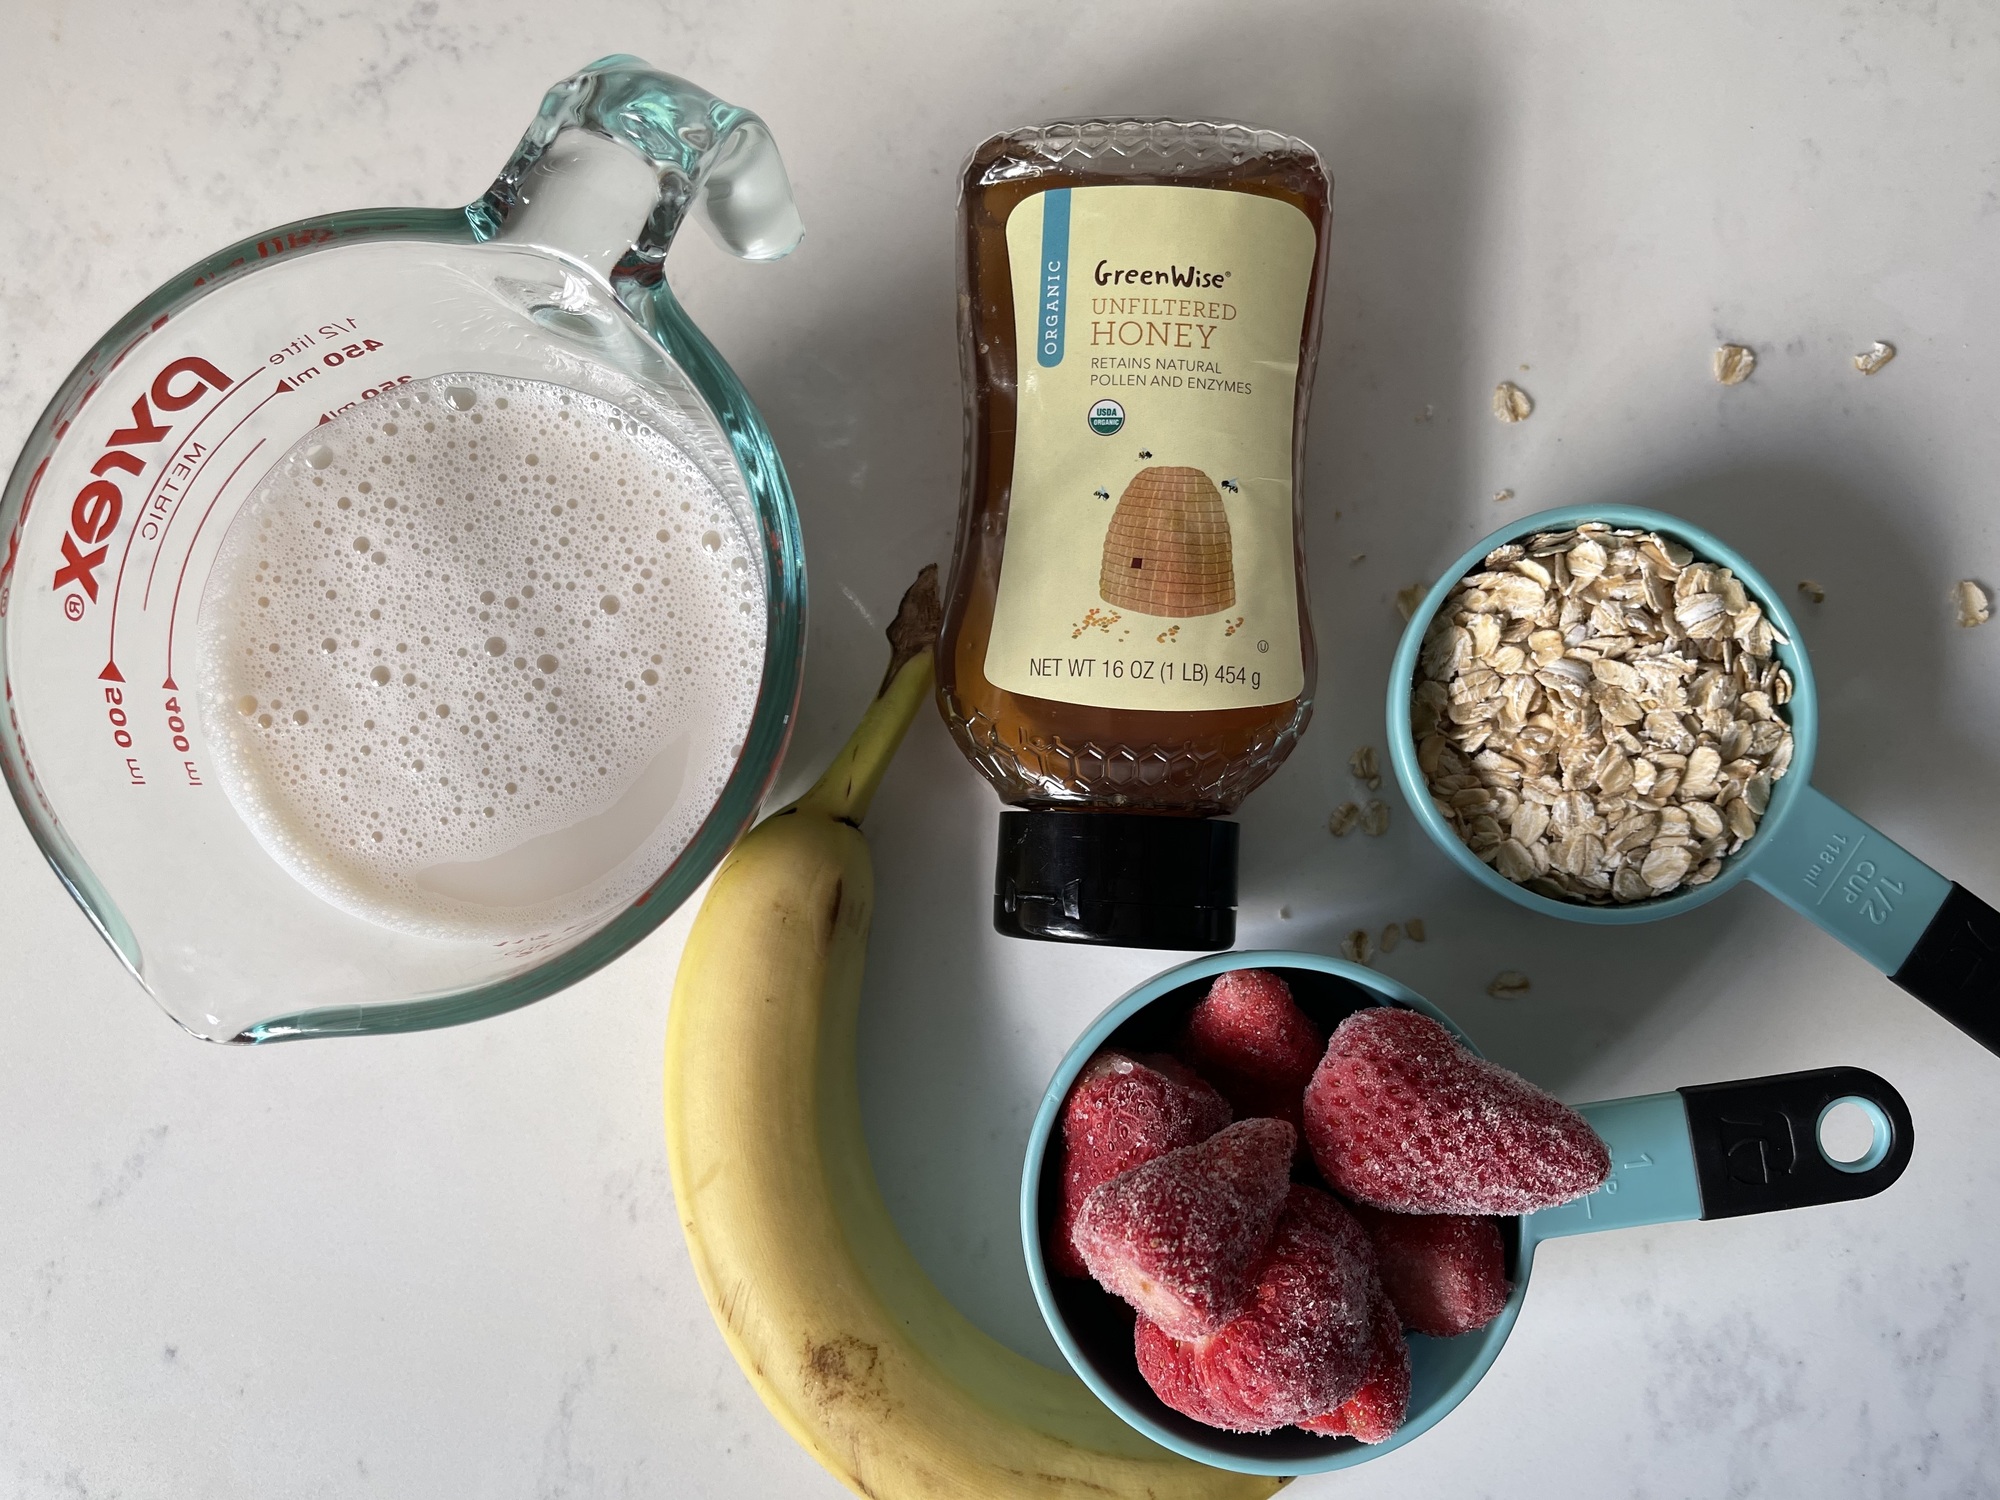 Strawberry oatmeal smoothie ingredients